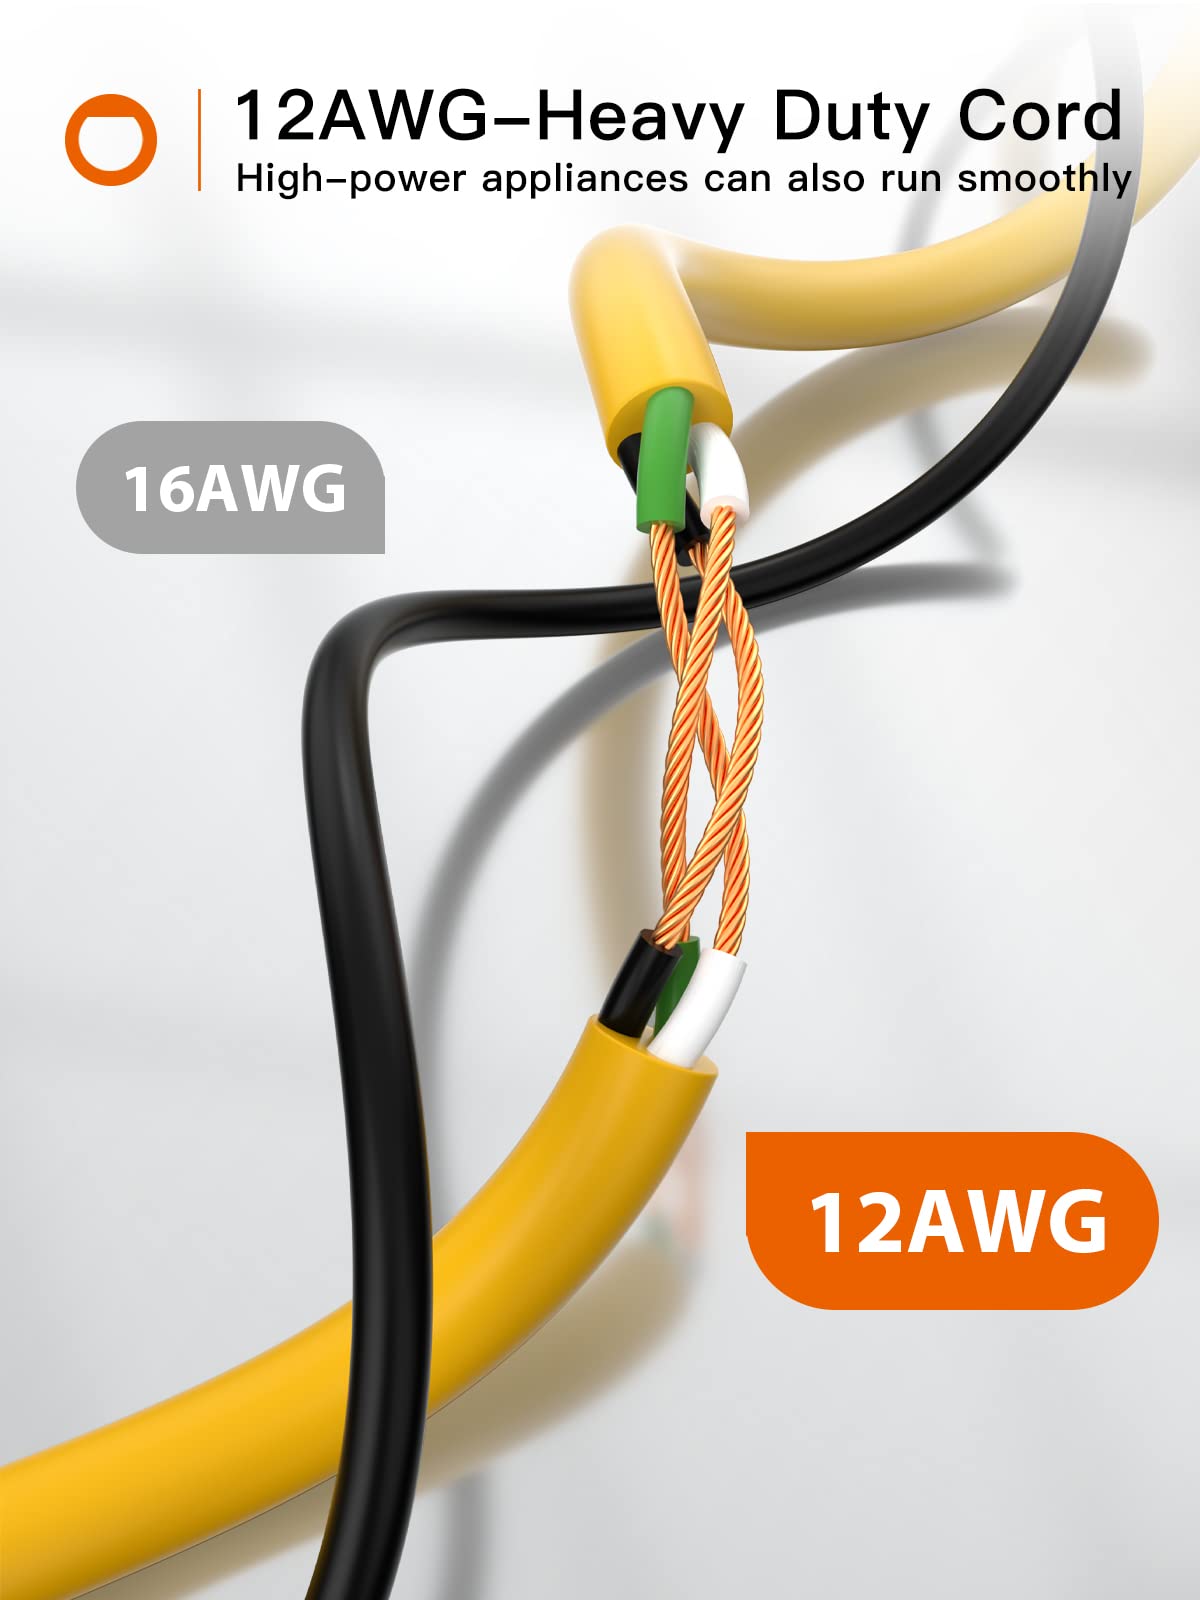 100Ft 12/3 Outdoor Extension Cord 12 Gauge SJTW Heavy Duty Waterproof Yellow 3 Prong, Flexible Long Power Cable for Garden Home or Office Use Indicator Light ETL Listed 100FT